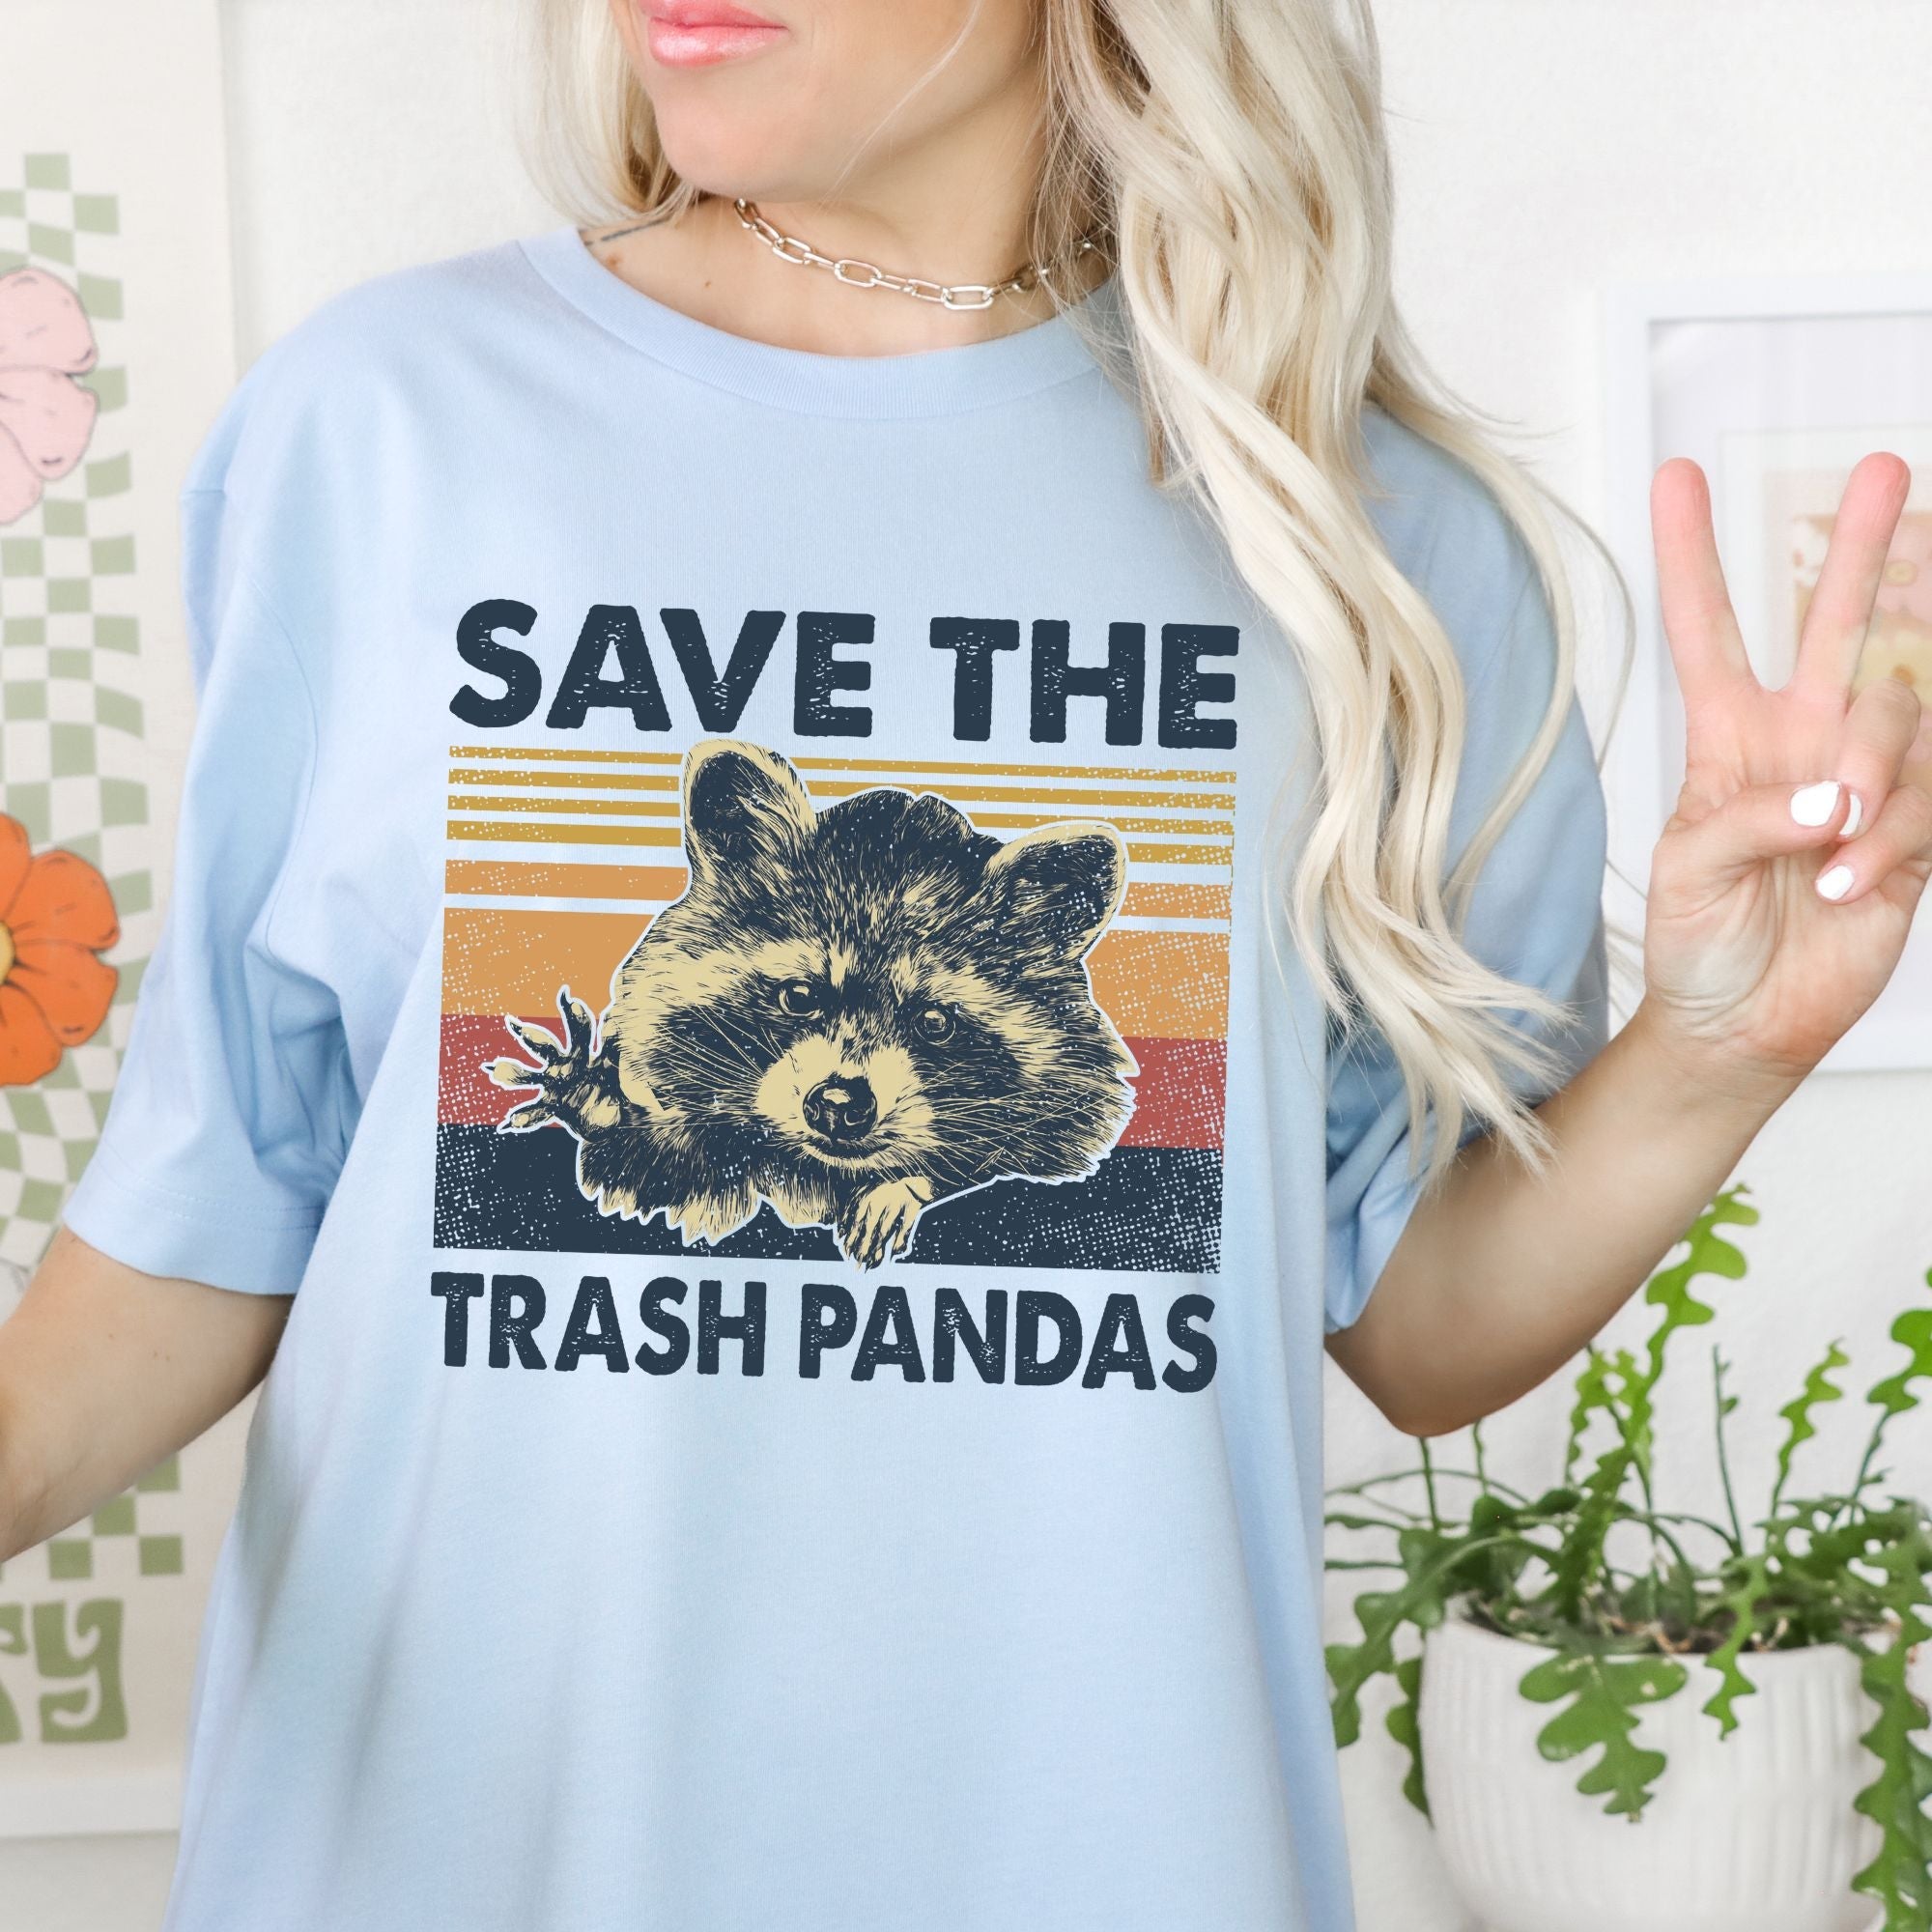 Save The Trash Pandas Funny Racoon Graphic Tee *UNISEX FIT*-Graphic Tees-208 Tees Wholesale, Idaho